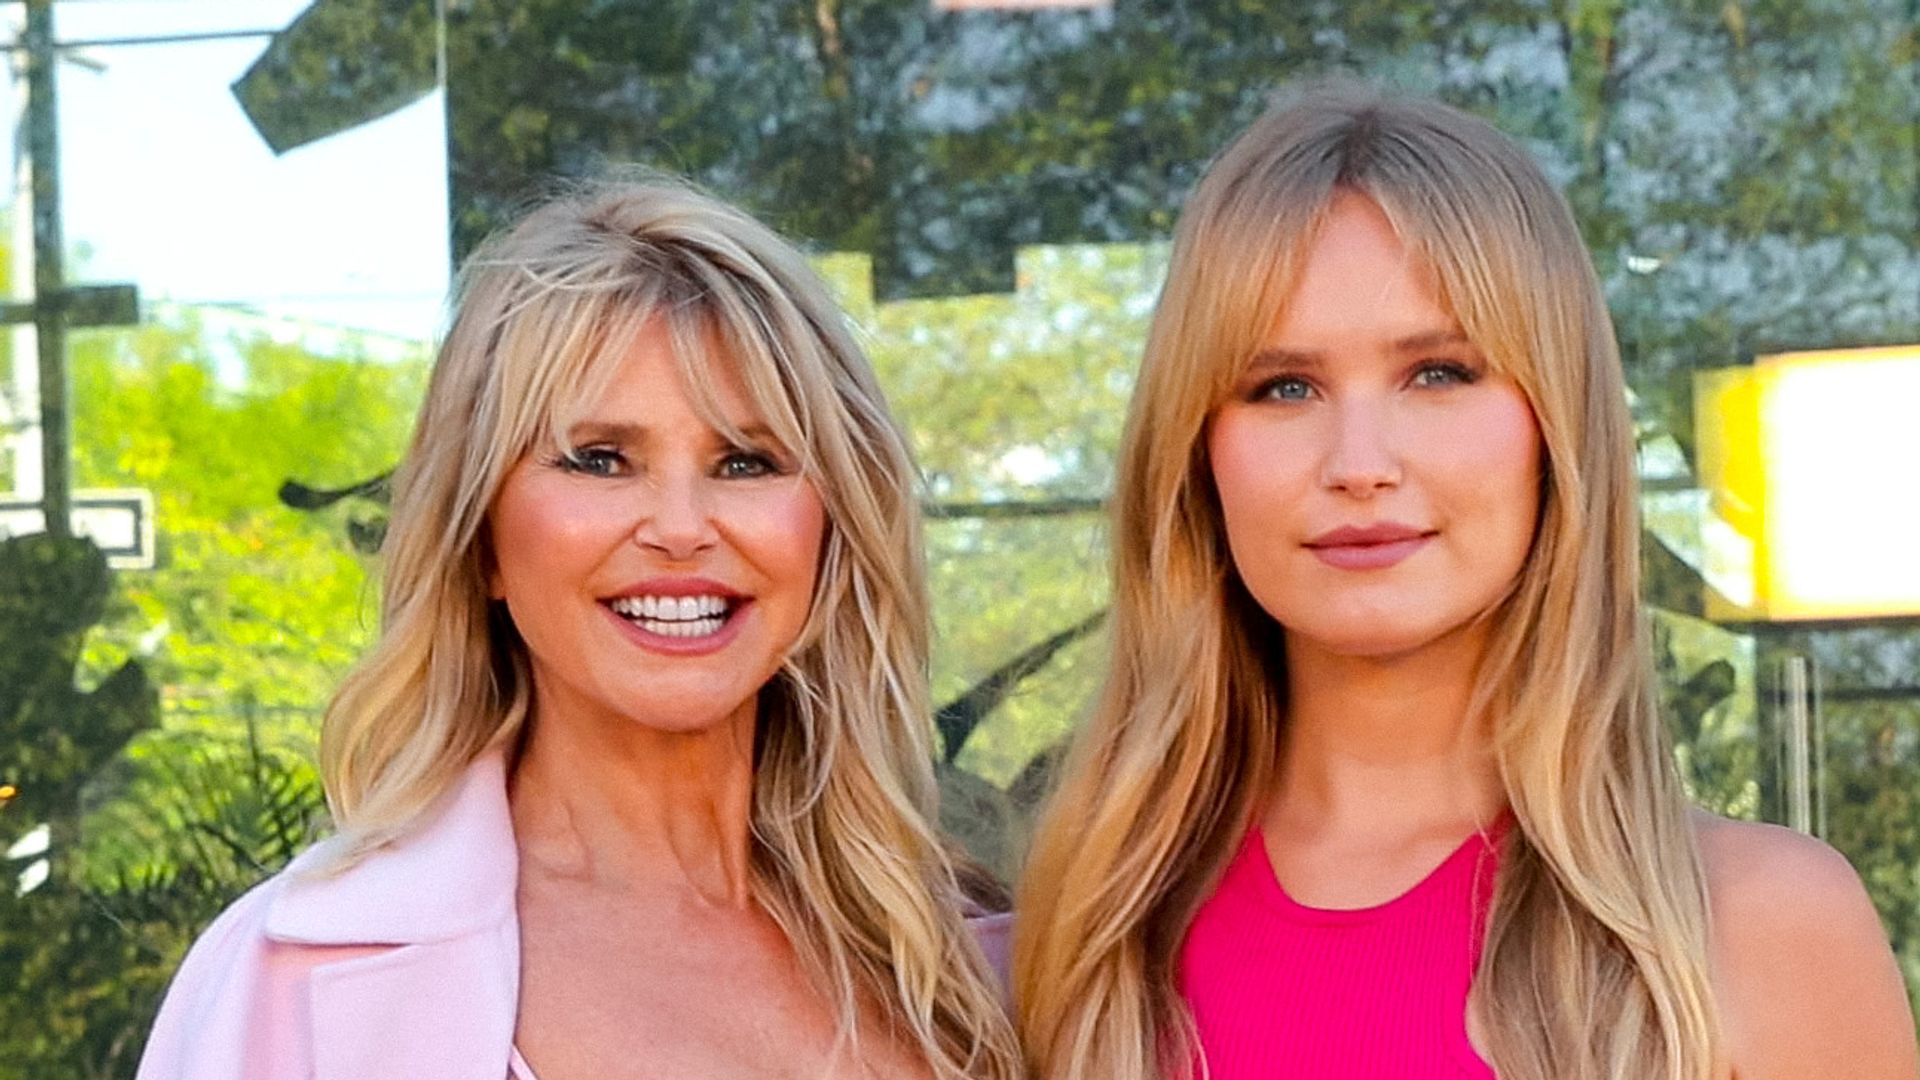 Christie Brinkley's daughter Sailor's charming NYC apartment is a far cry from mom's $29.5 million estate – see inside